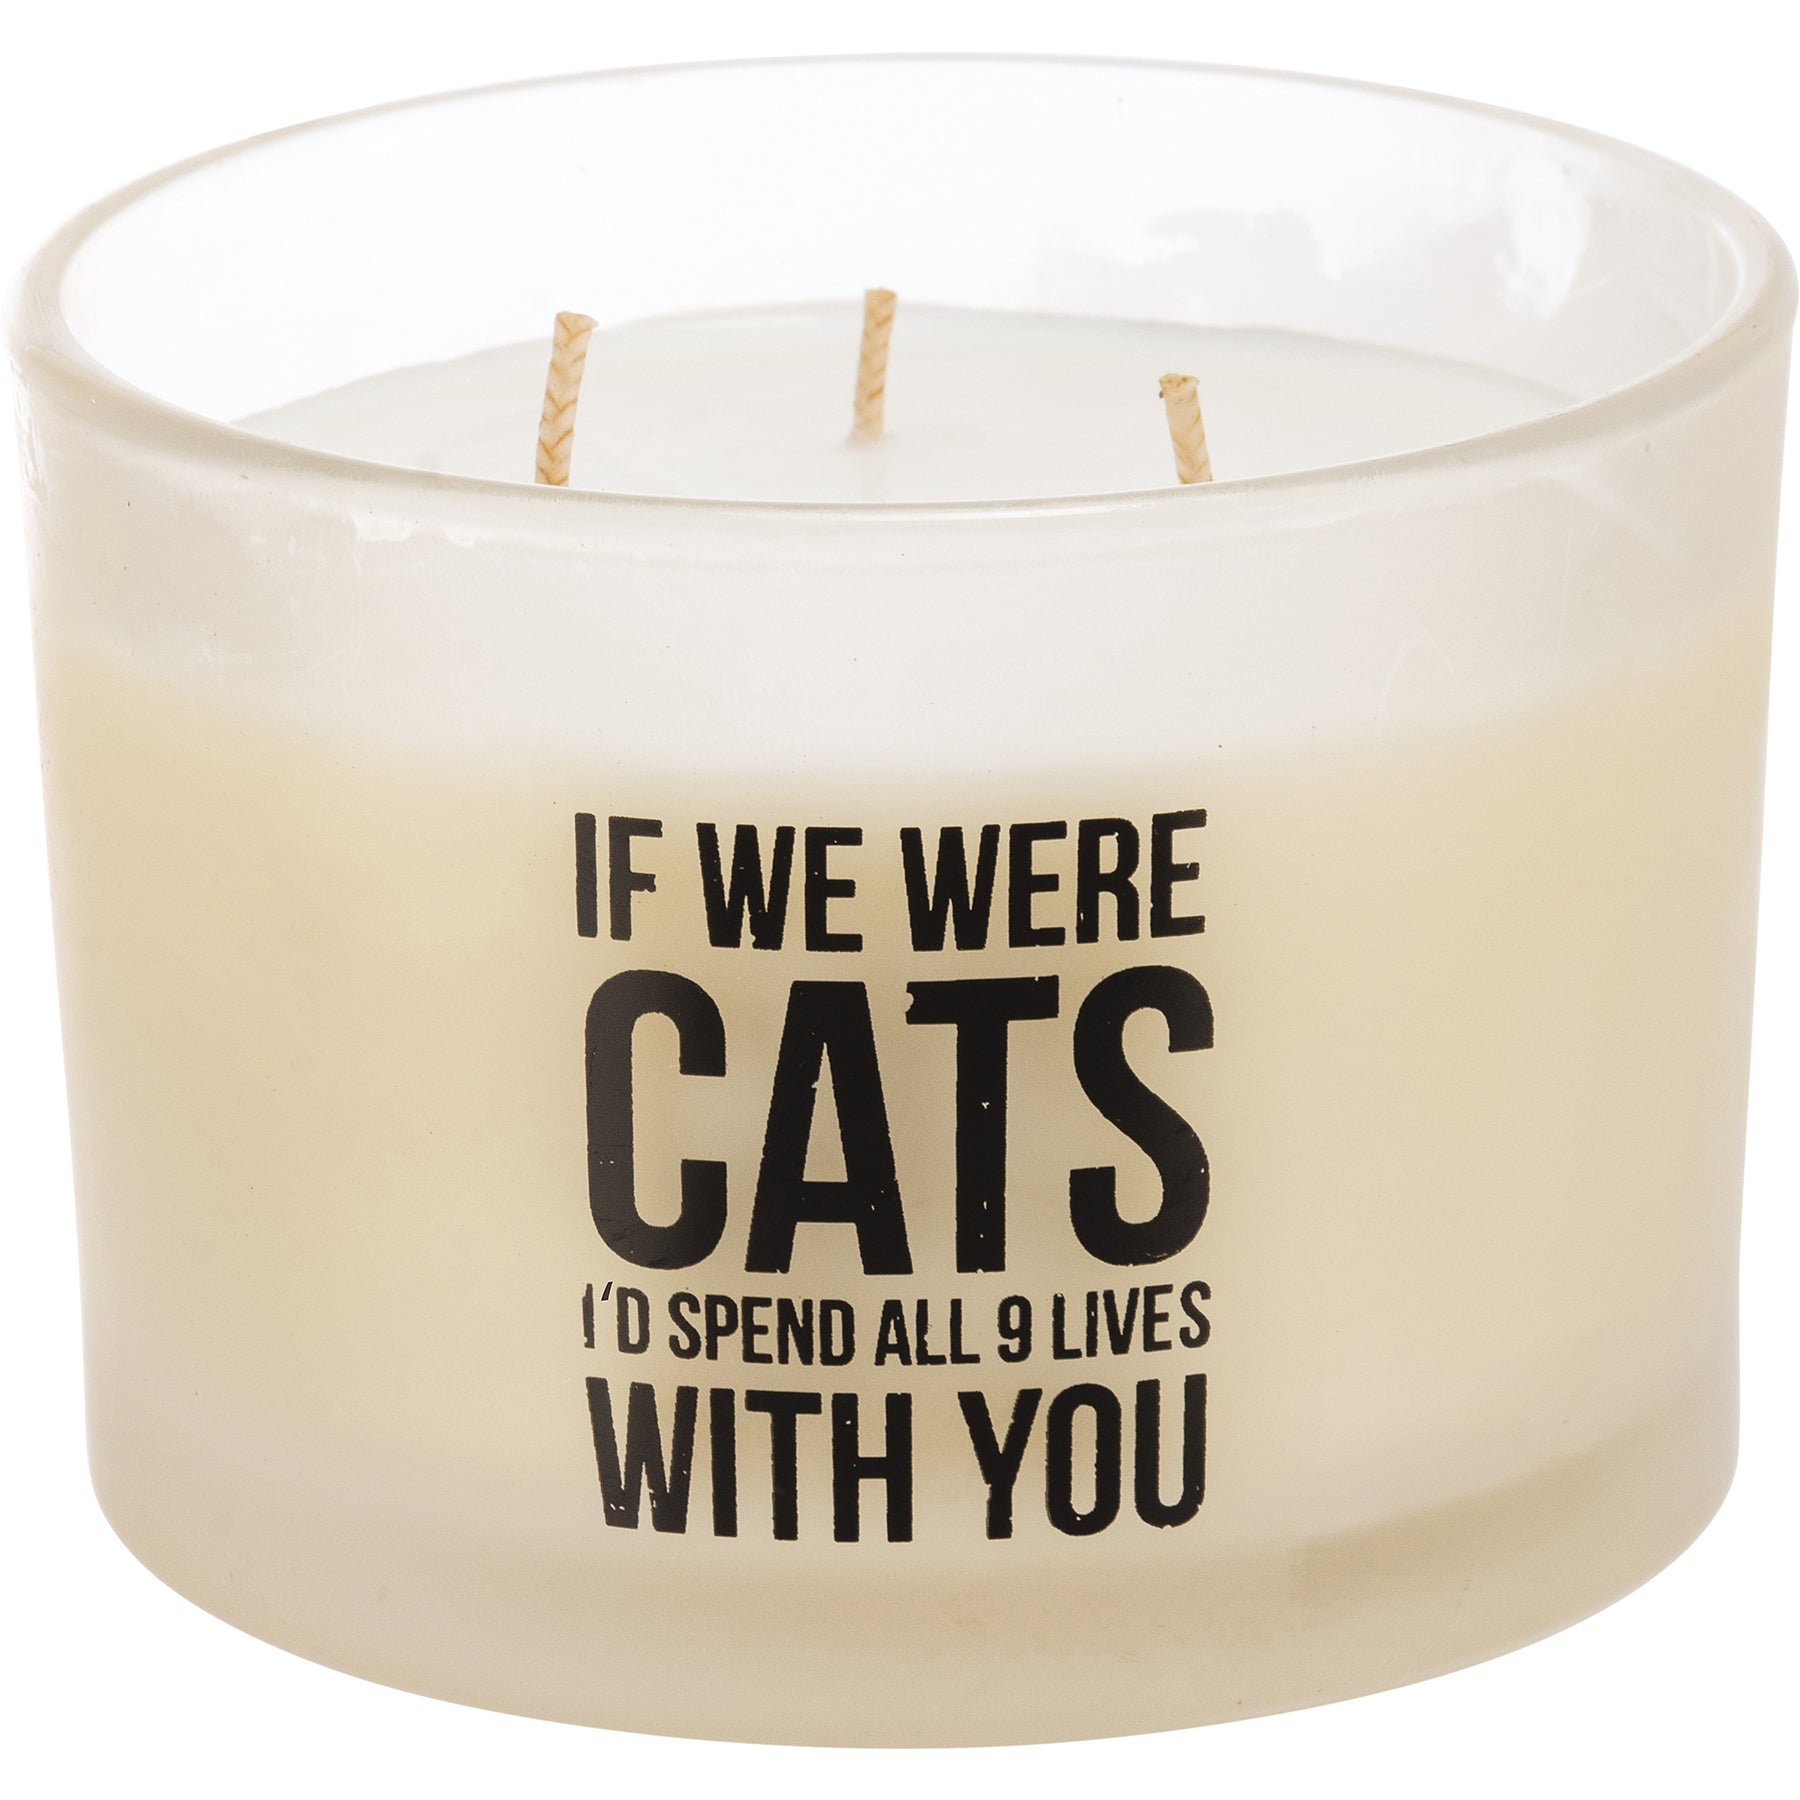 9 Lives Candle